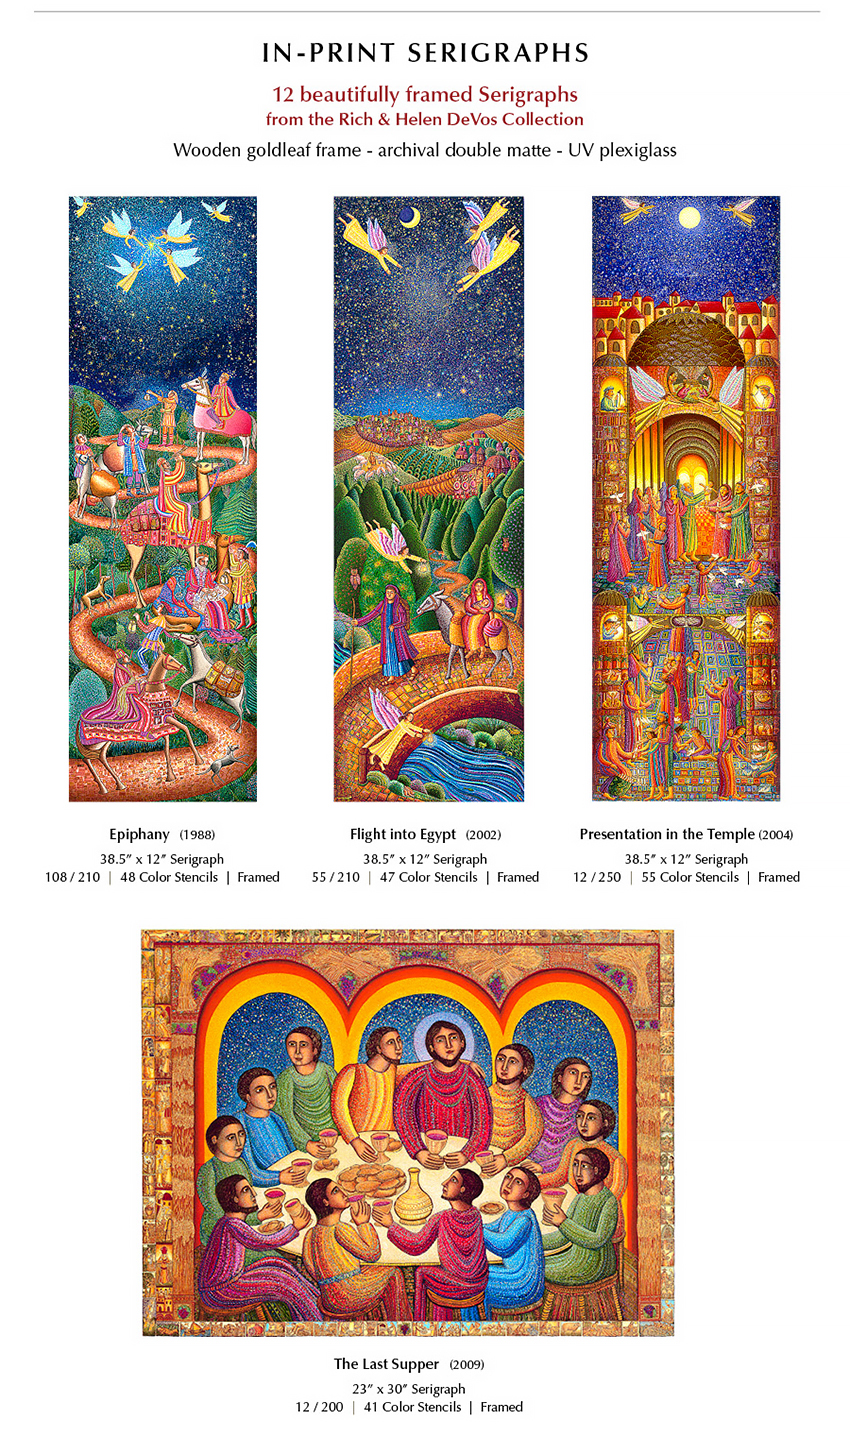 The John August Swanson serigraphs are a one-time offer - only 1 left of each Serigraph. Eyekons is a source for Christian art, religious art, biblical art and church art.